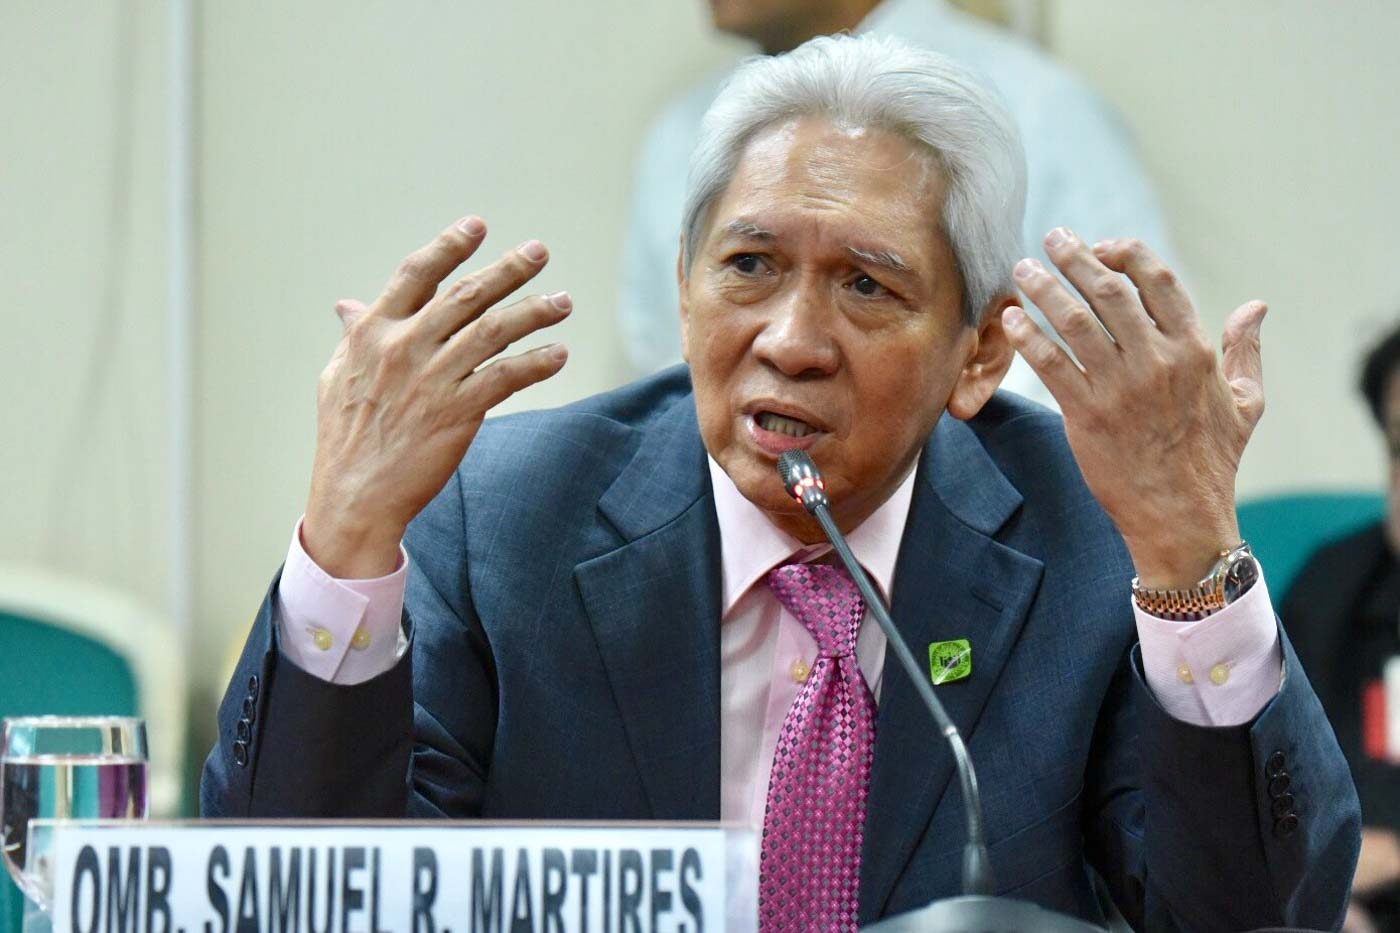 Still withholding SALN, Martires says PCIJ violated wiretapping law